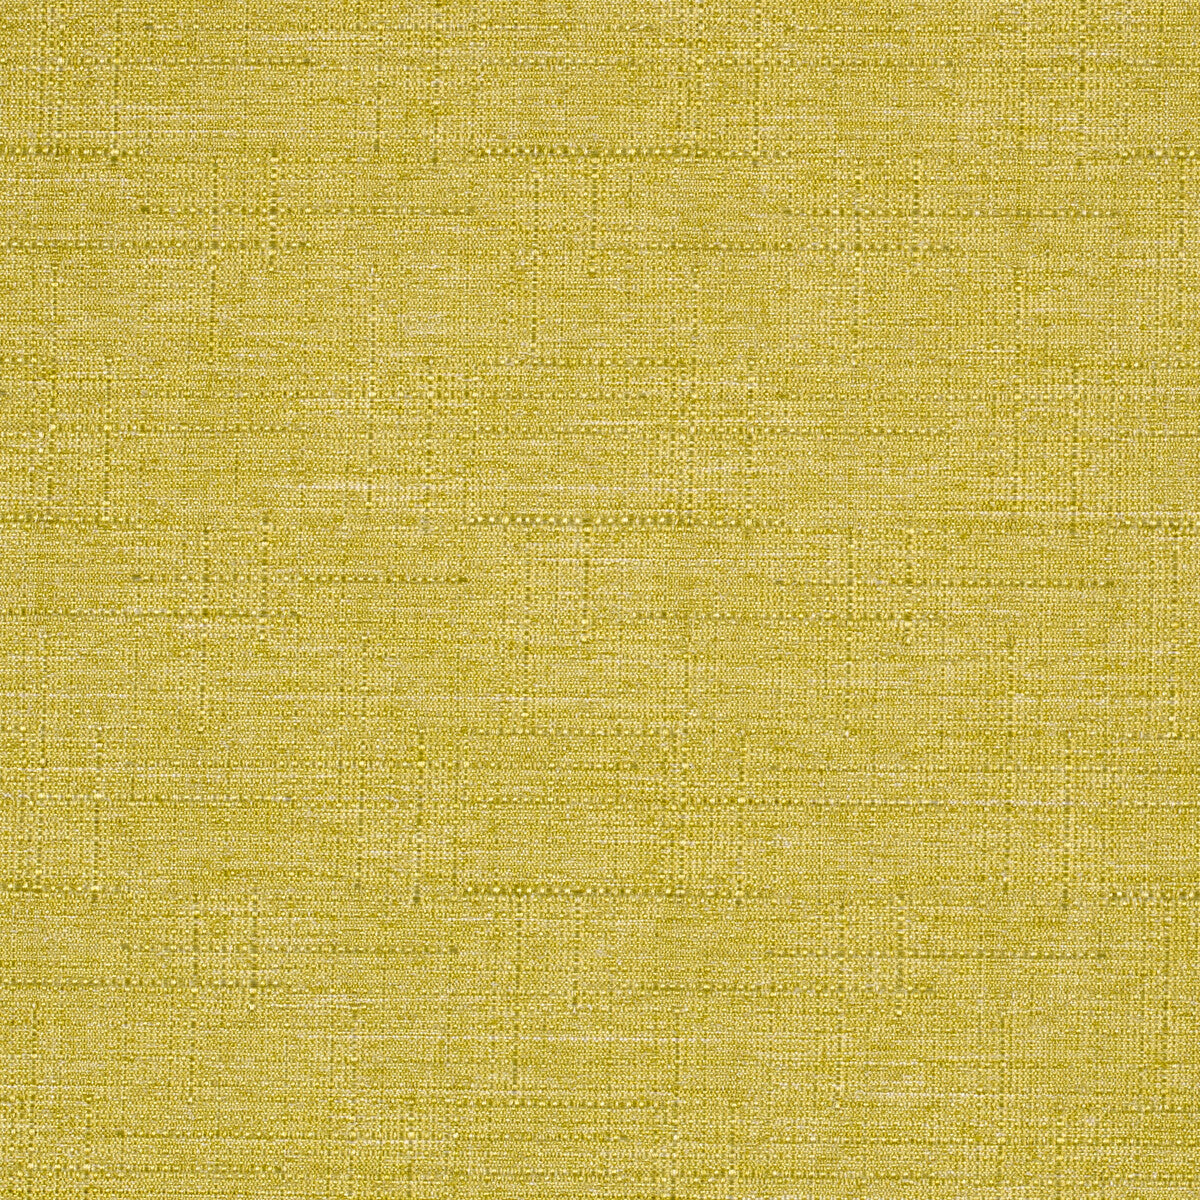 Kravet Contract fabric in 4317-23 color - pattern 4317.23.0 - by Kravet Contract